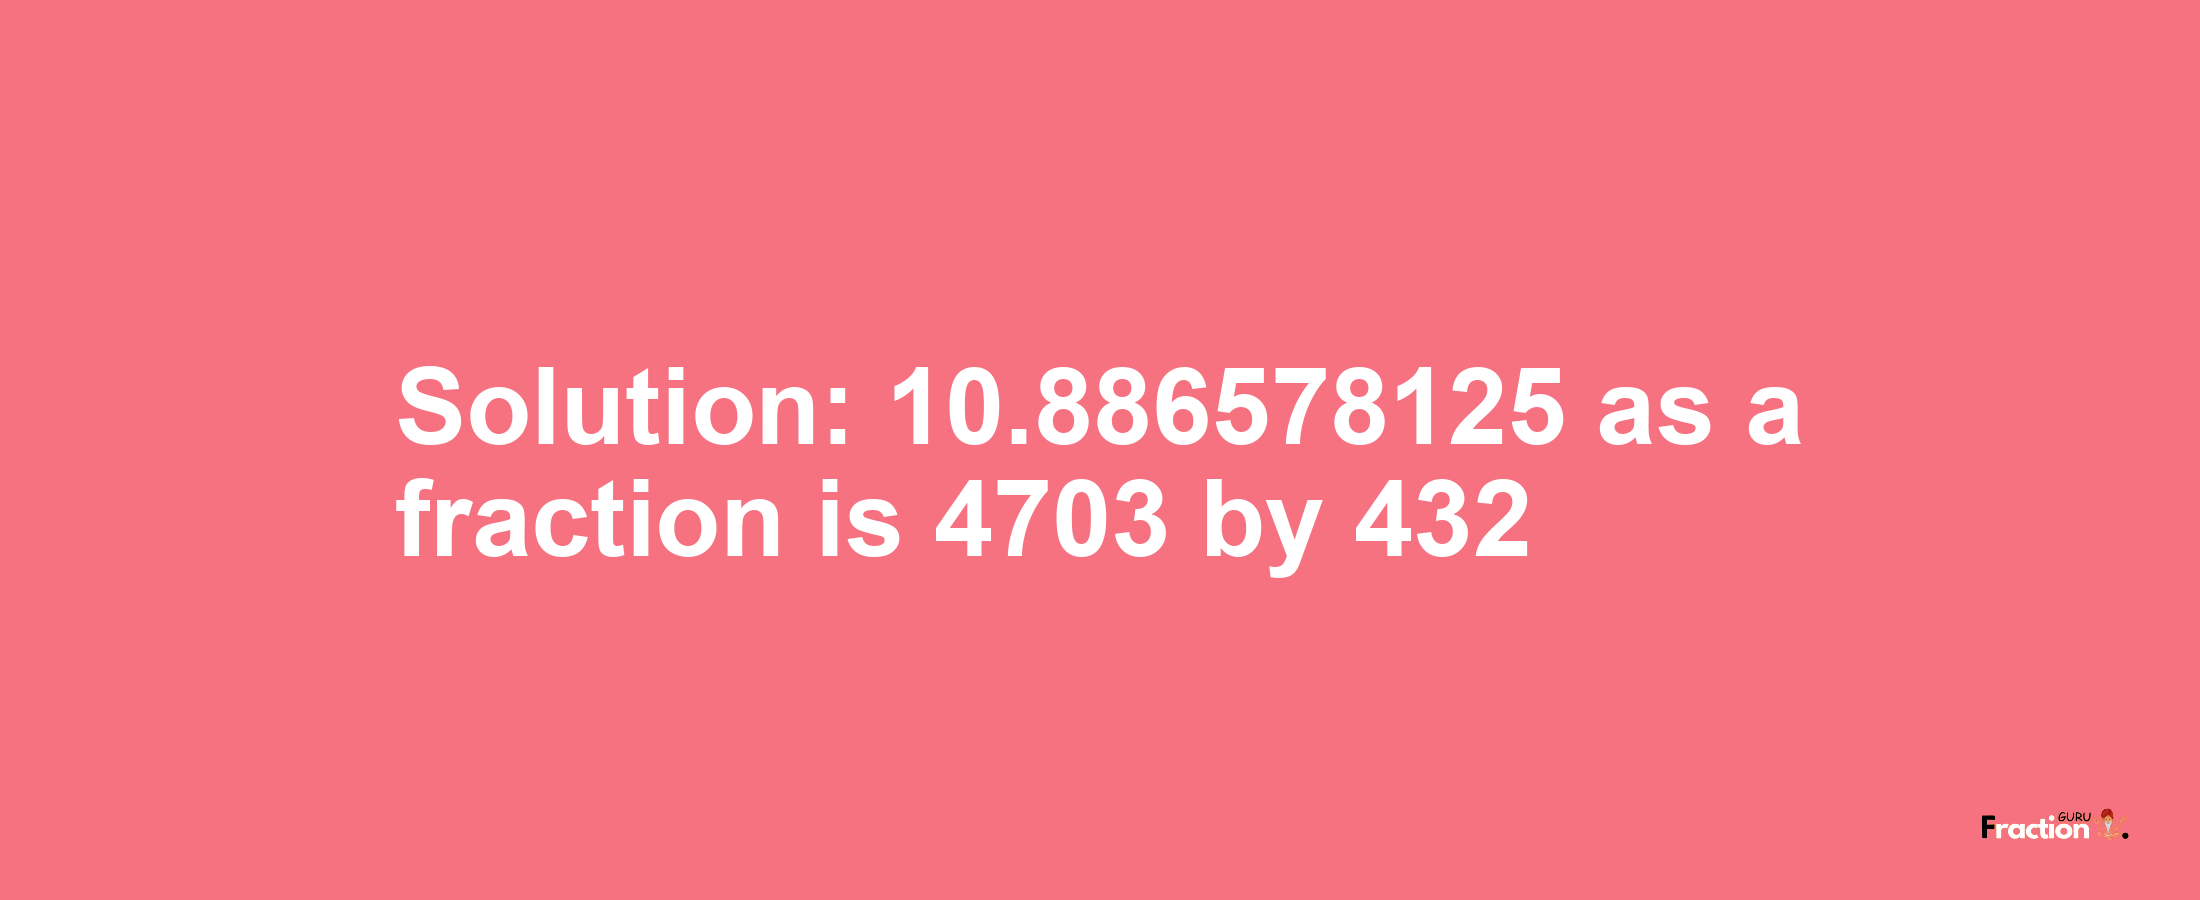 Solution:10.886578125 as a fraction is 4703/432